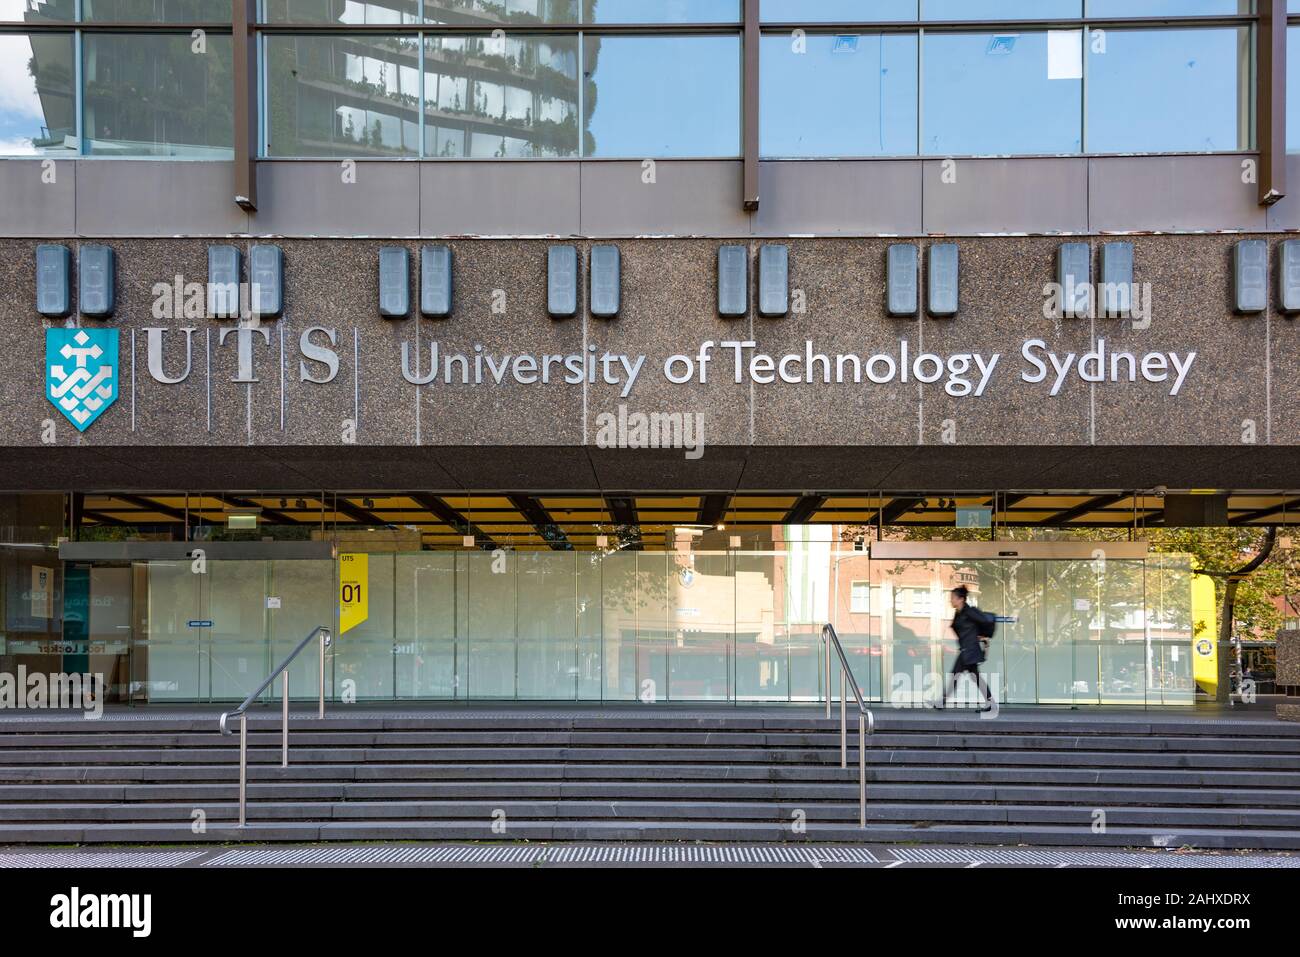 Sydney, Australia - April 25, 2016: University of Technology Sydney building in Ultimo with person walking Stock Photo